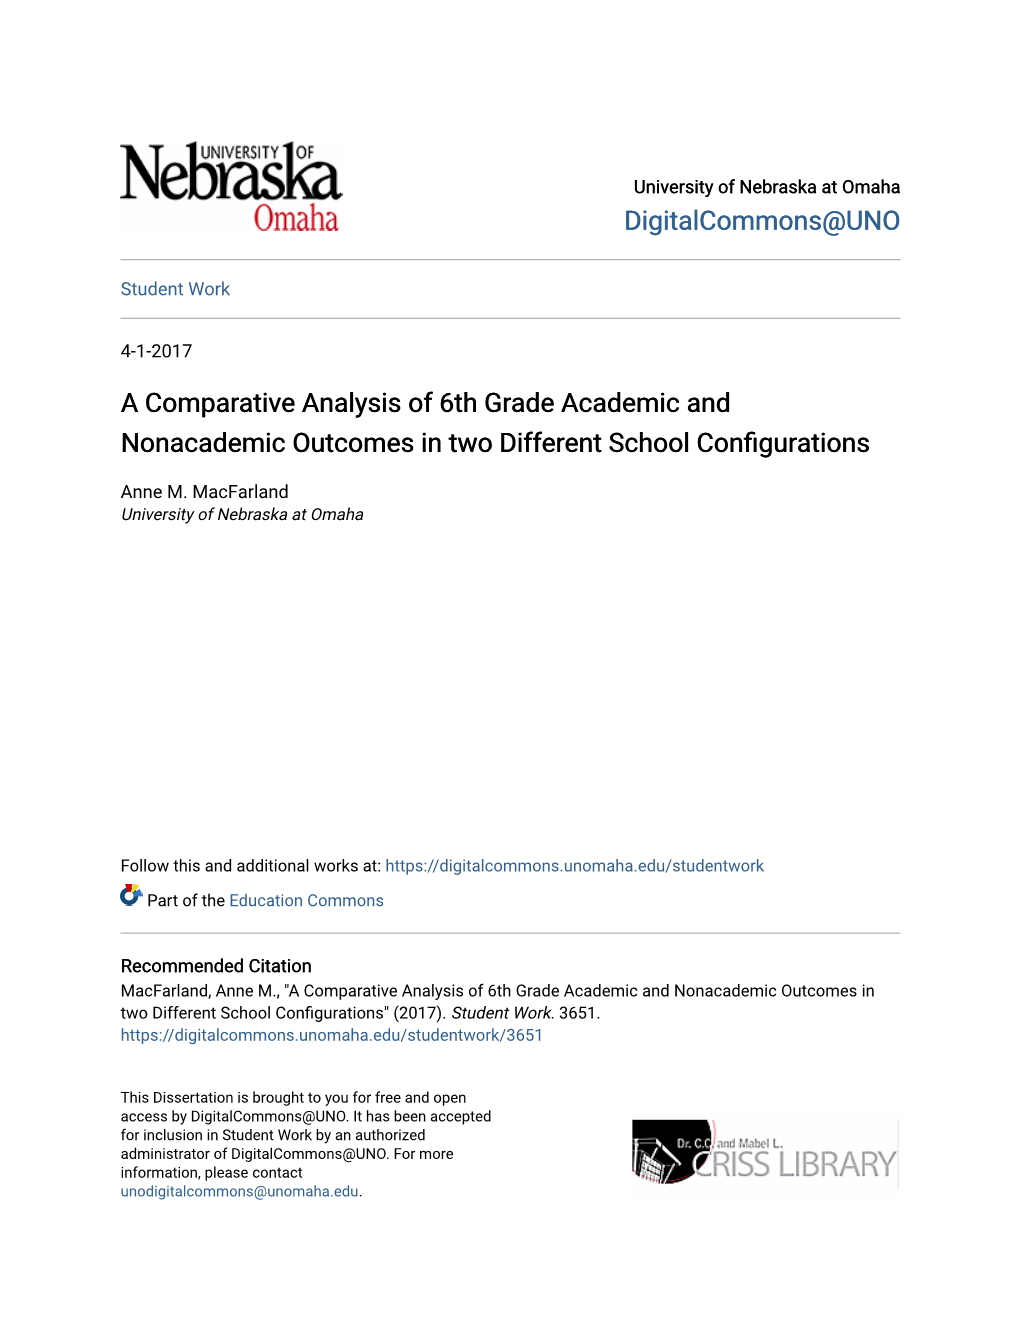 A Comparative Analysis of 6Th Grade Academic and Nonacademic Outcomes in Two Different School Configurations